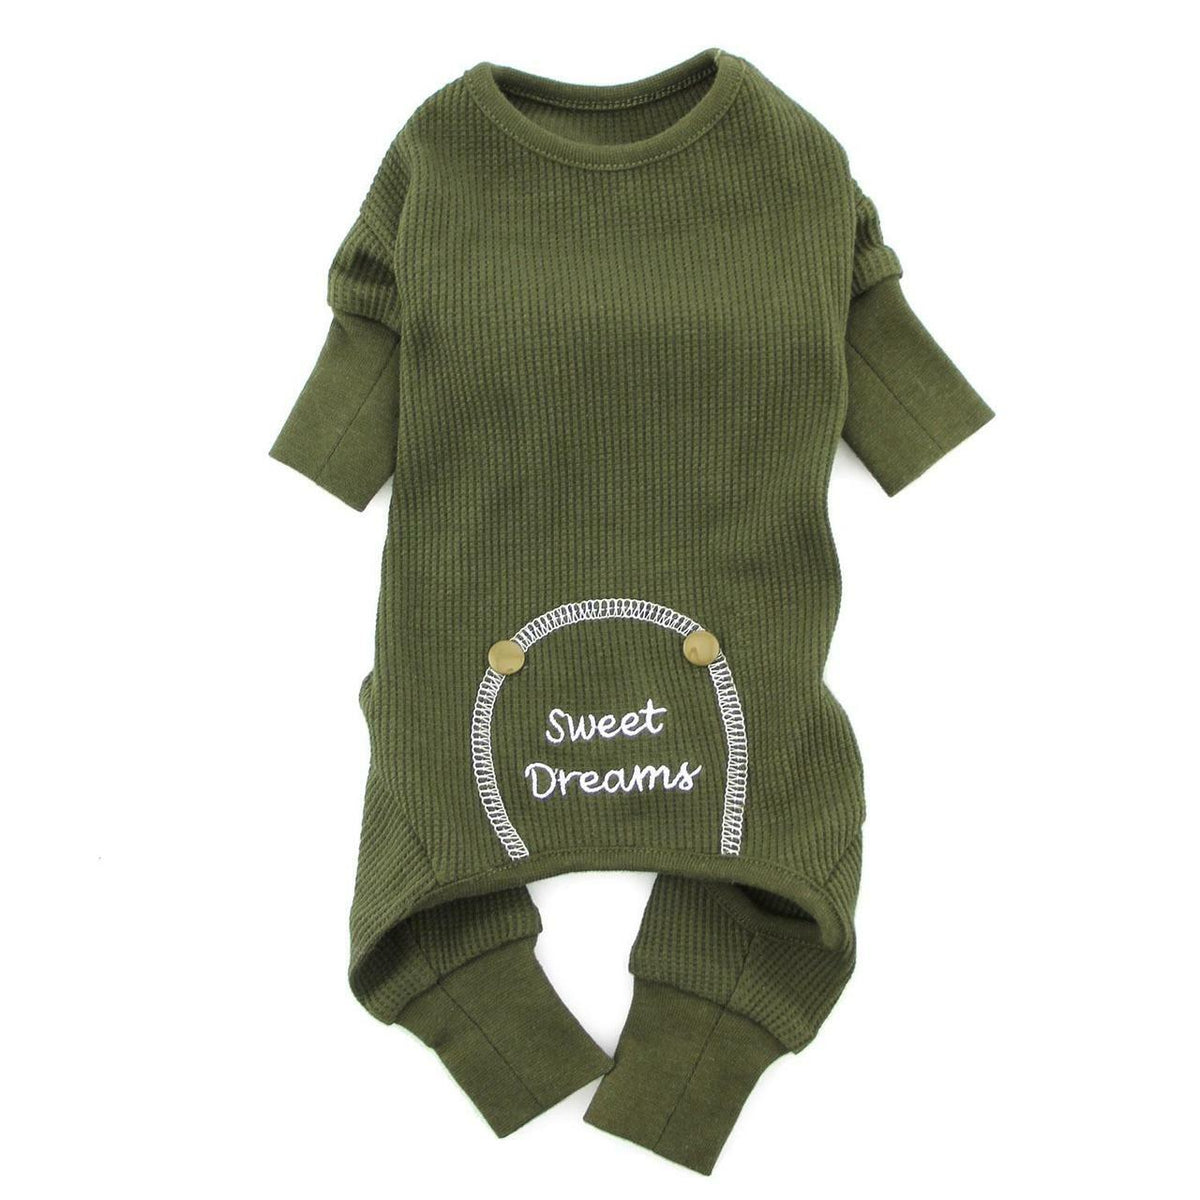 Dog Thermal Pajamas Doggie SWEET DREAMS Embroidered Long Johns Design Herb Green